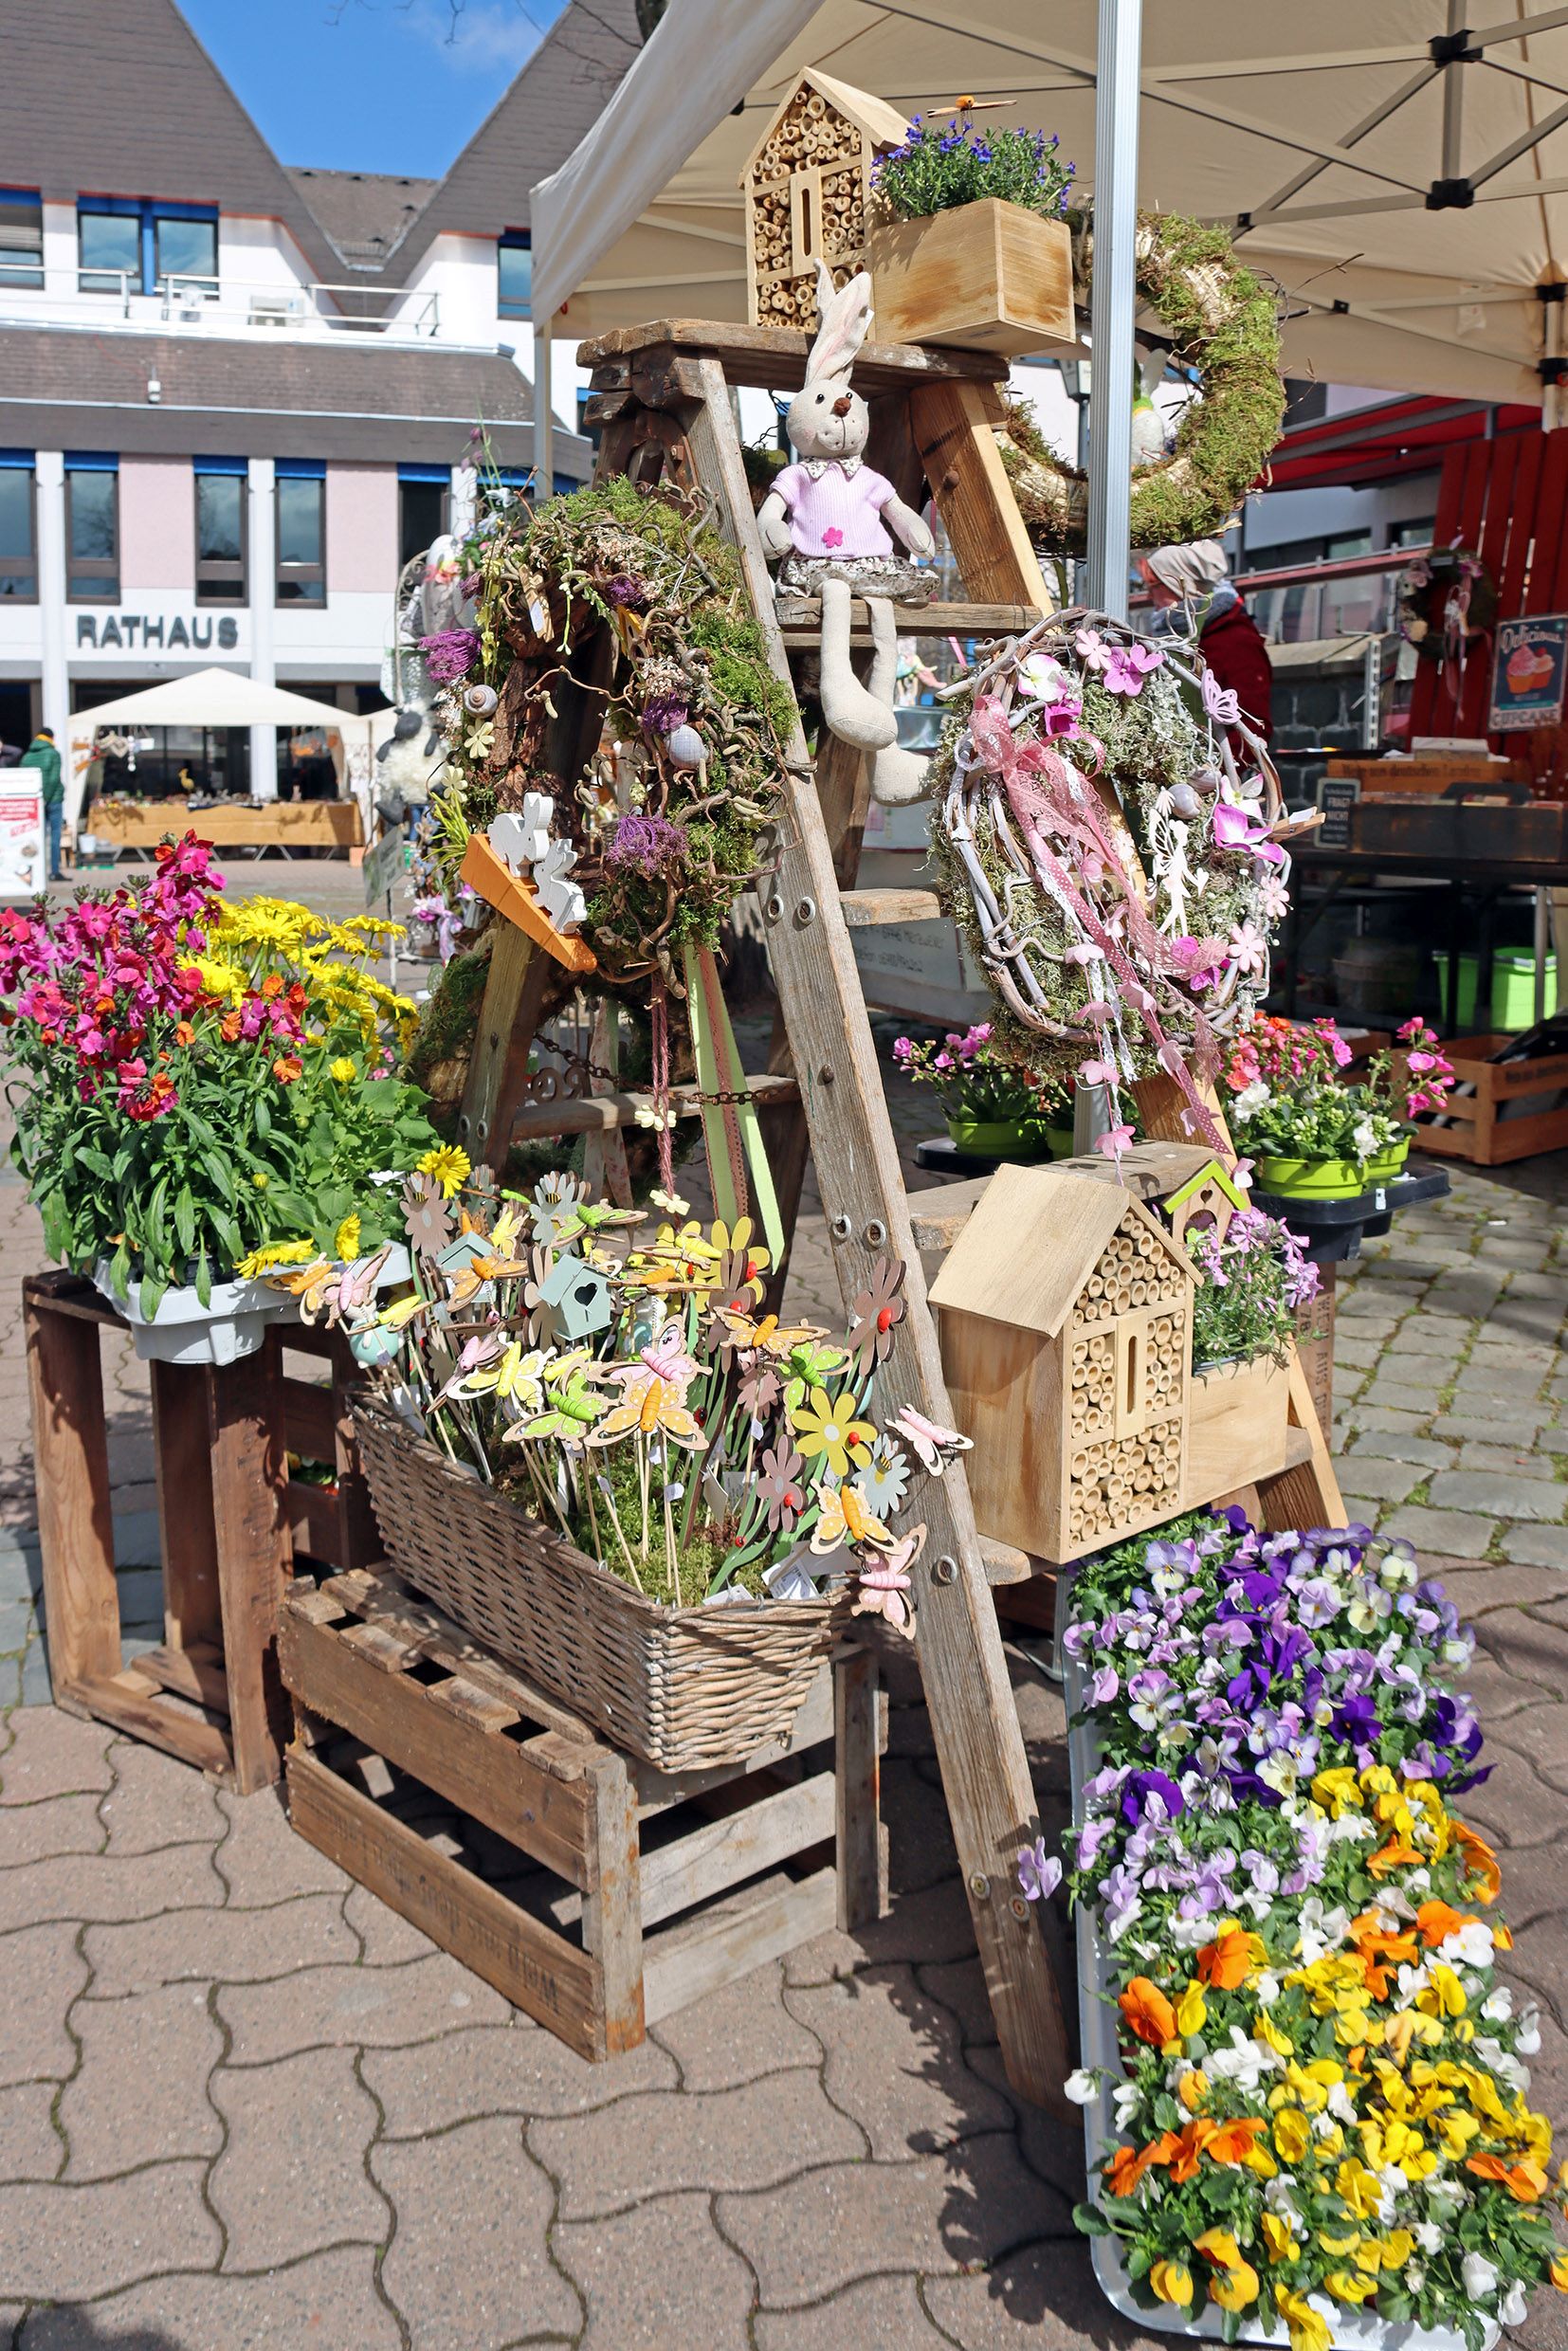 Picture of the Ramstein Spring Market